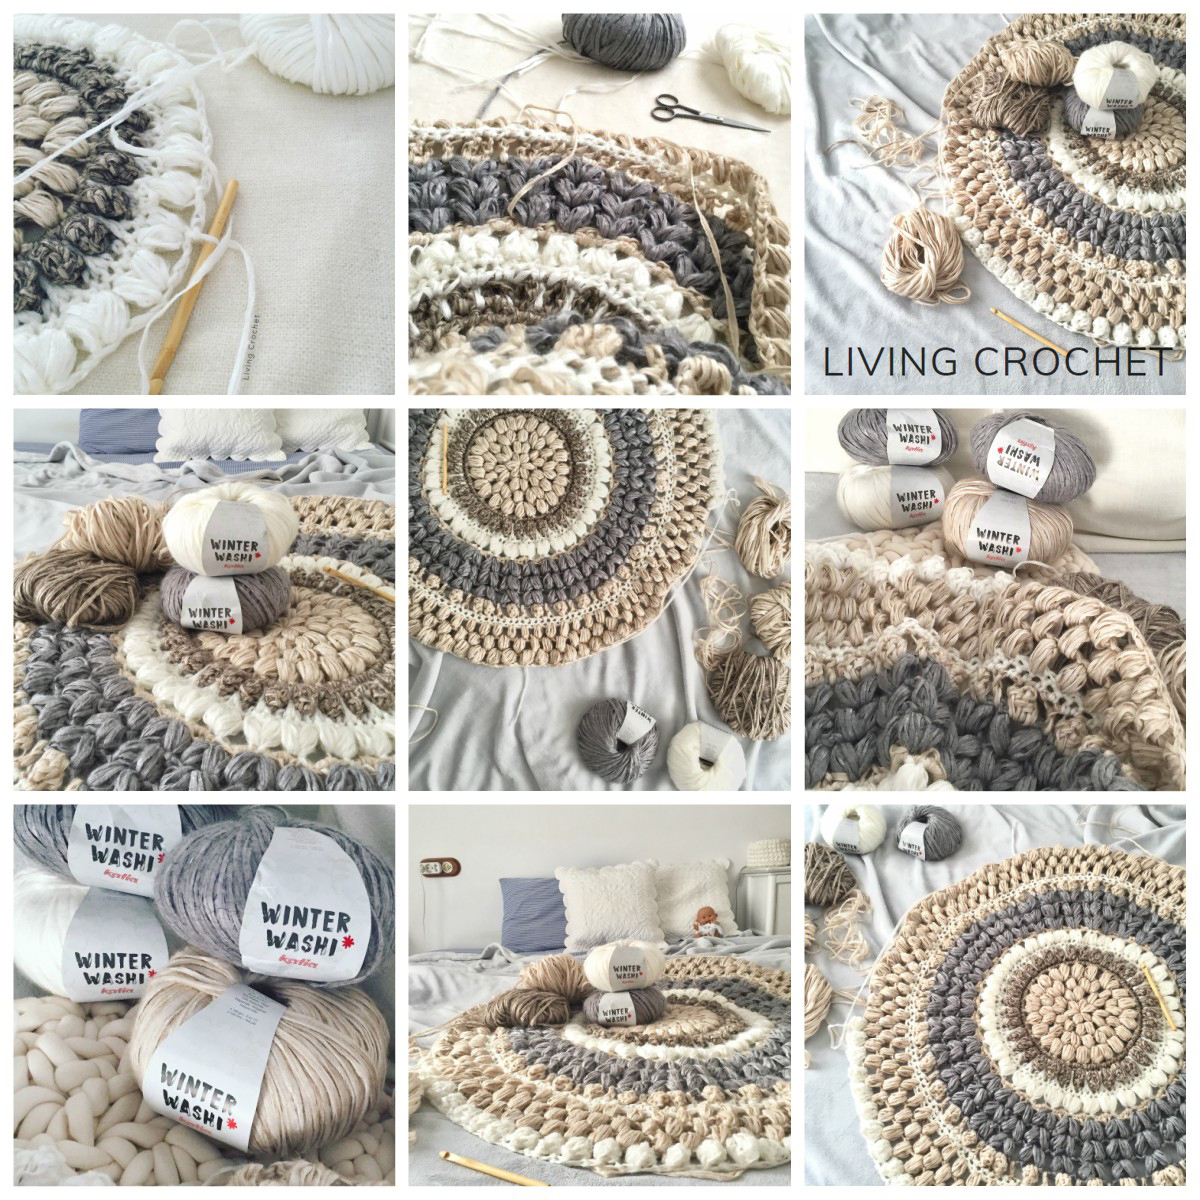 How To Follow A Crochet Pattern Living Crochet Shows You How To Crochet A Round Rug With Winter Washi